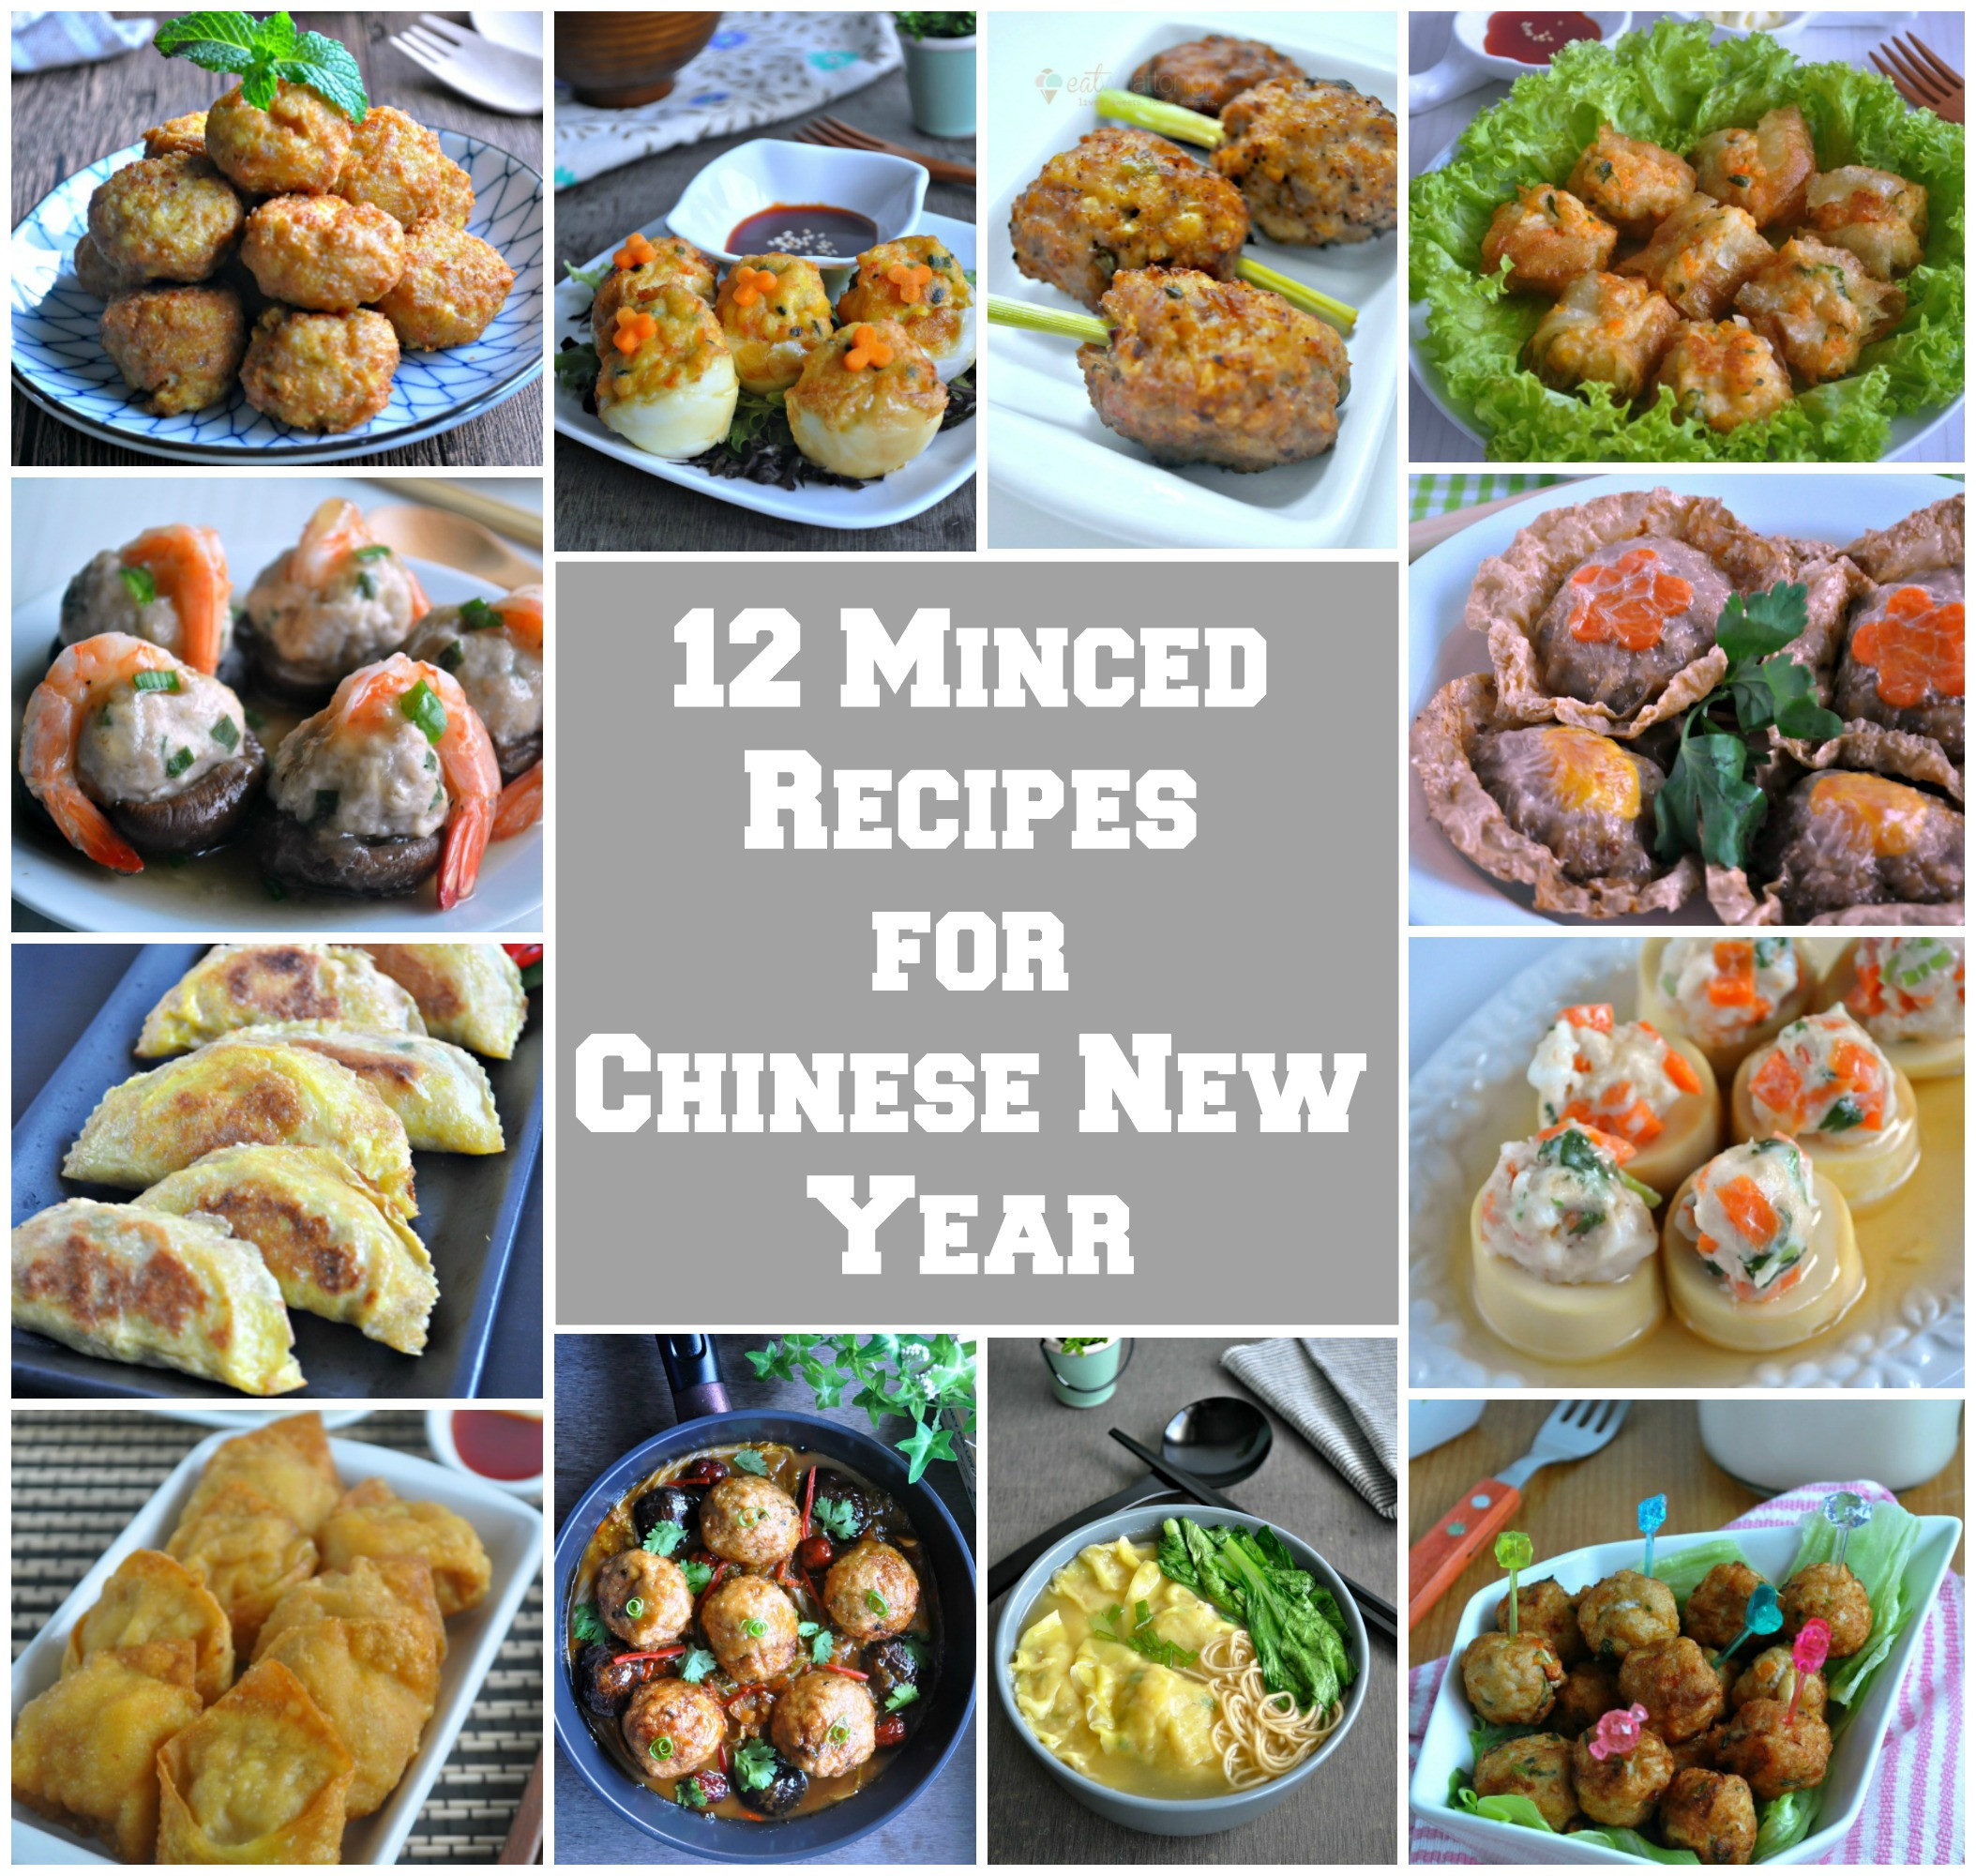 Chinese New Year Dishes Recipes
 12 Minced Recipes for Chinese New Year Eat What Tonight